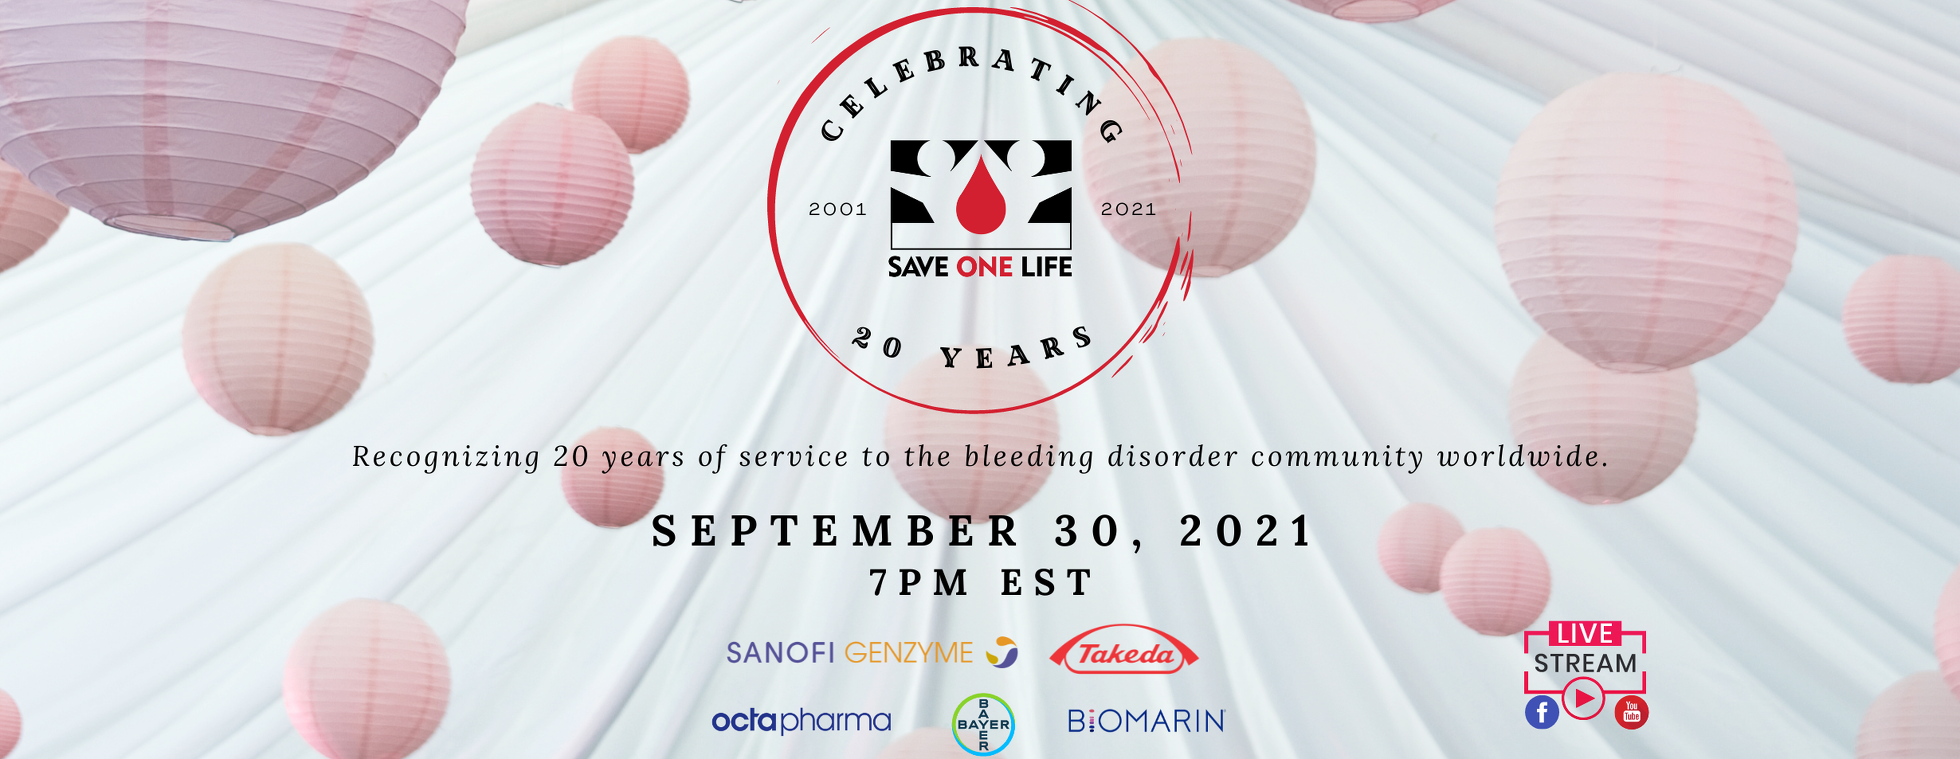 Save One Life Auction